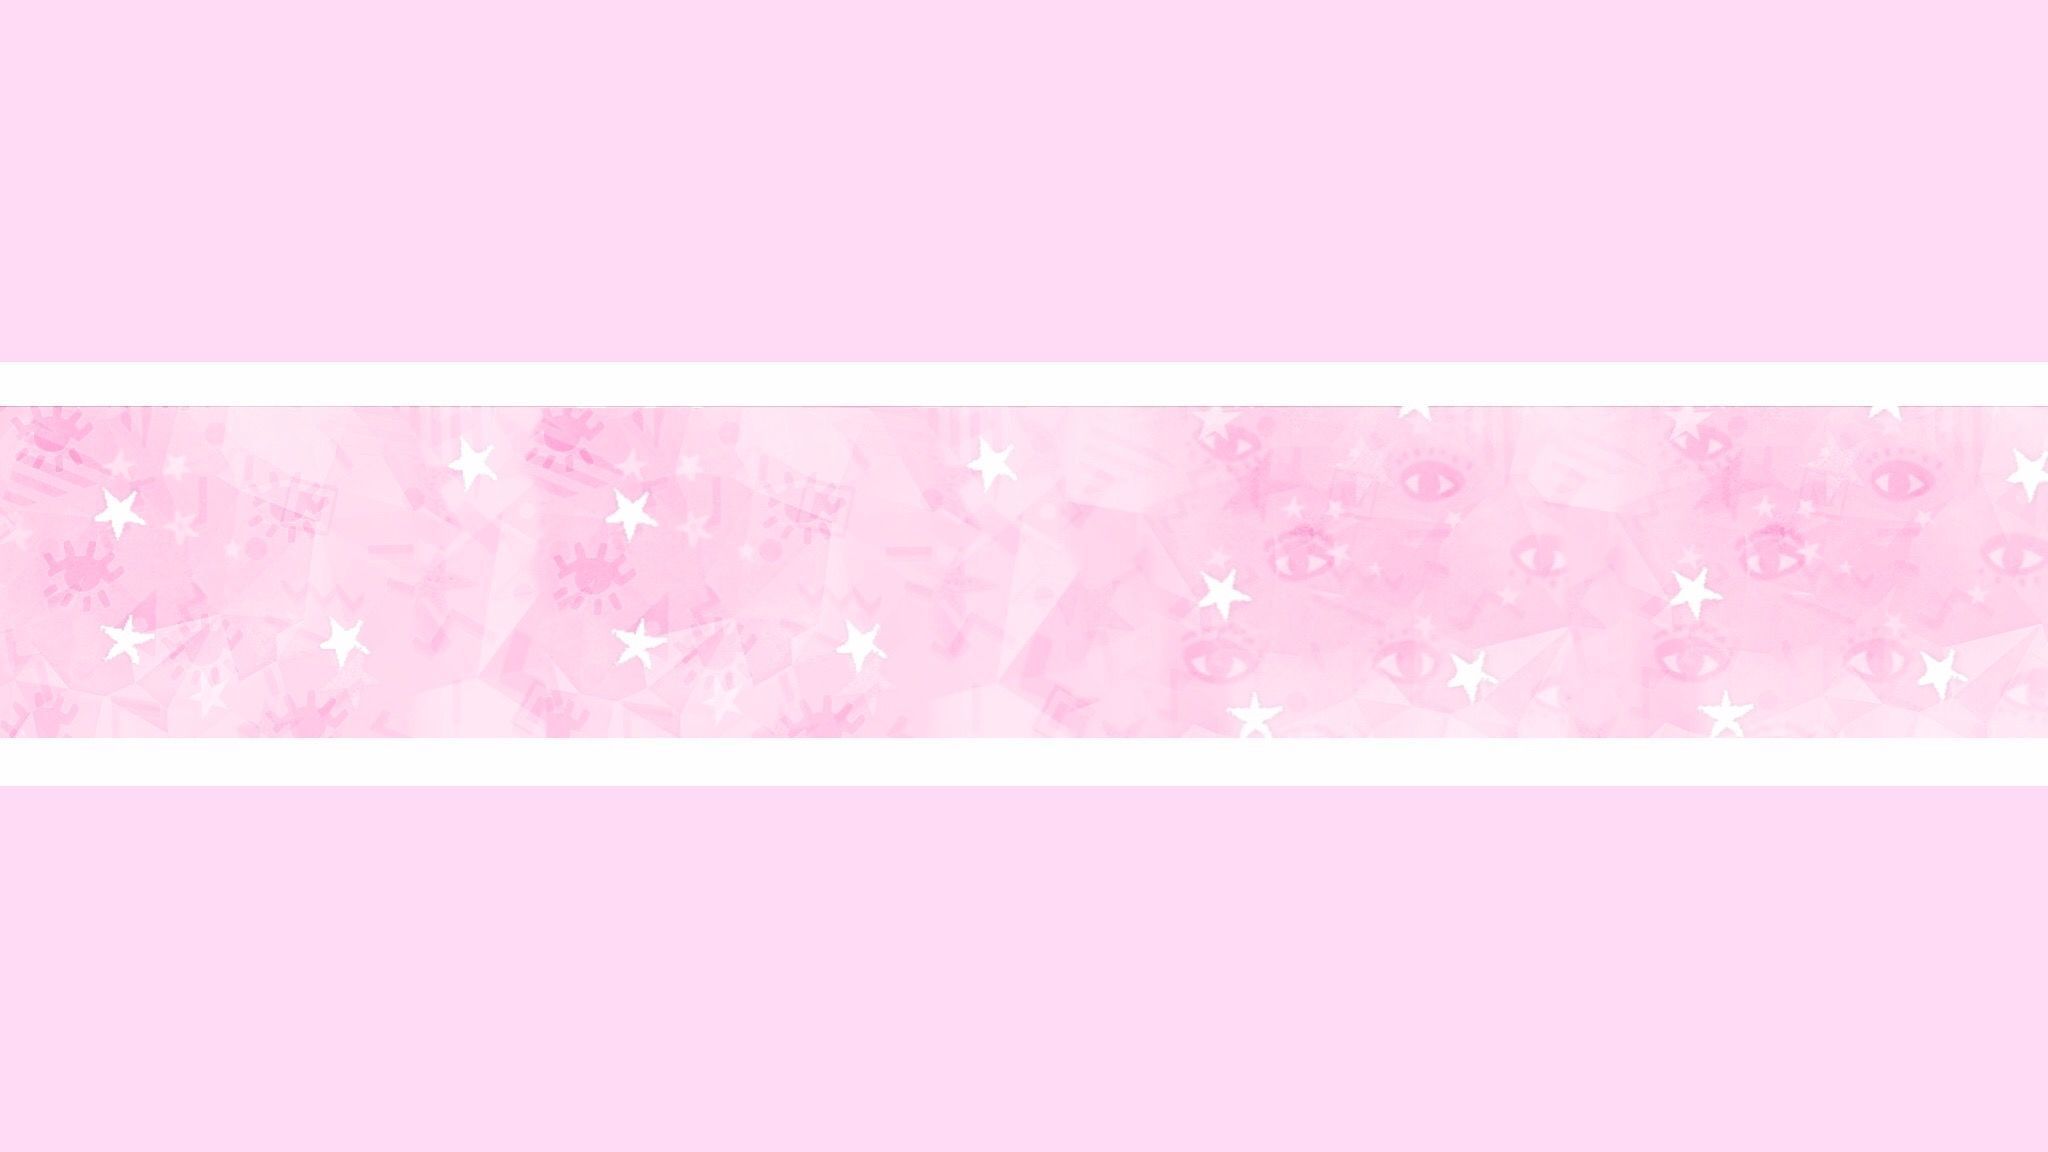 A pink background with a white starry border - 2048x1152, YouTube